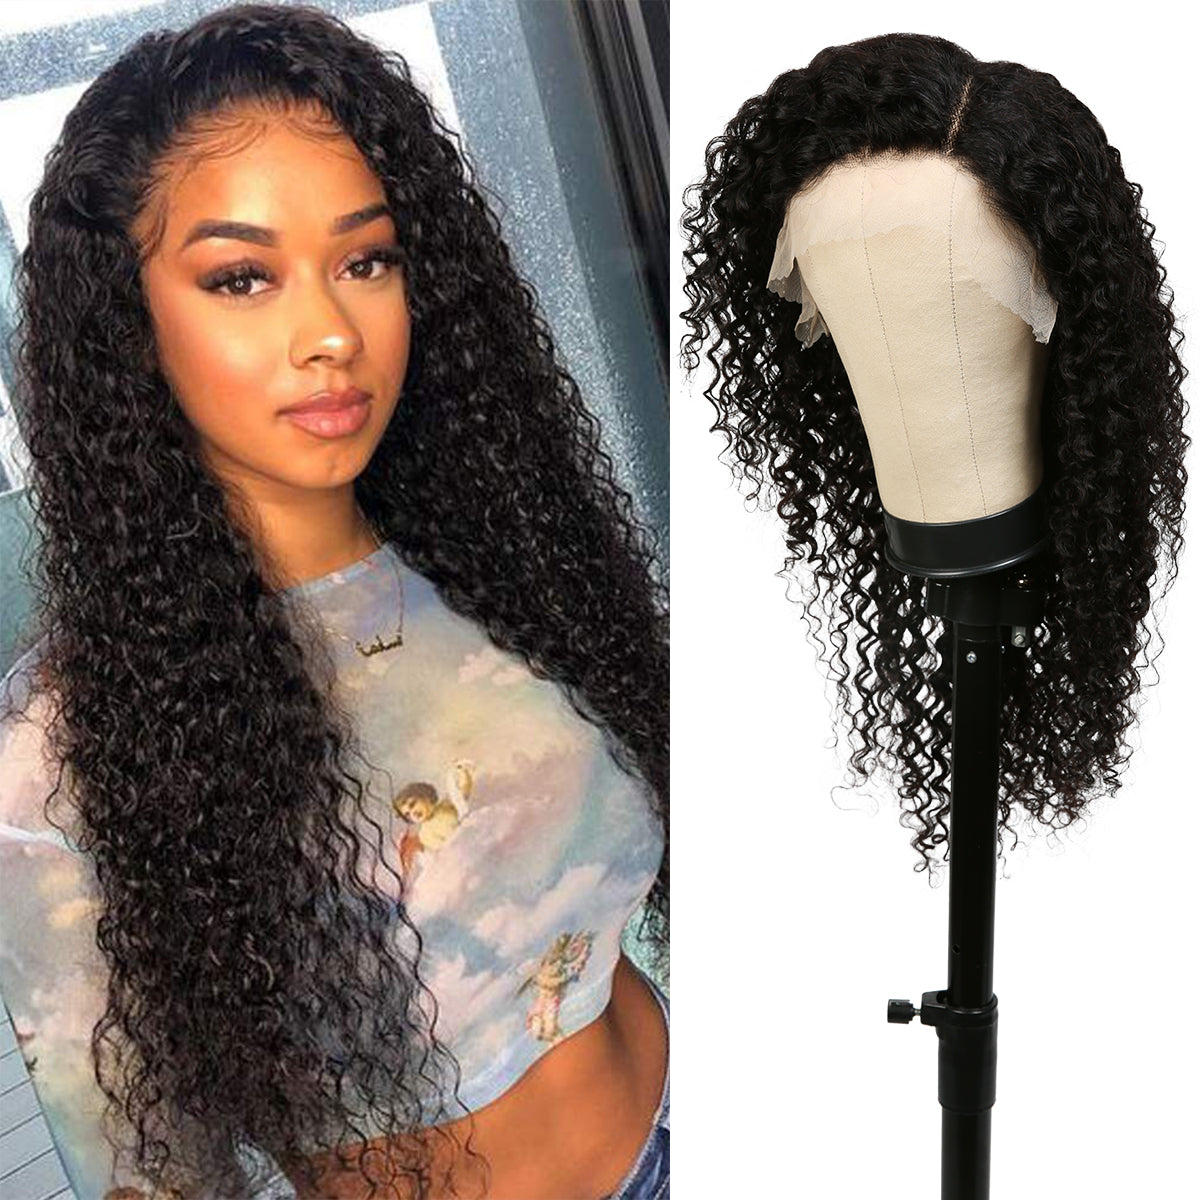 Human Hair, Lace Wig, 13x4, Frontal, Free Part, Bohemian, Jerry, 24"